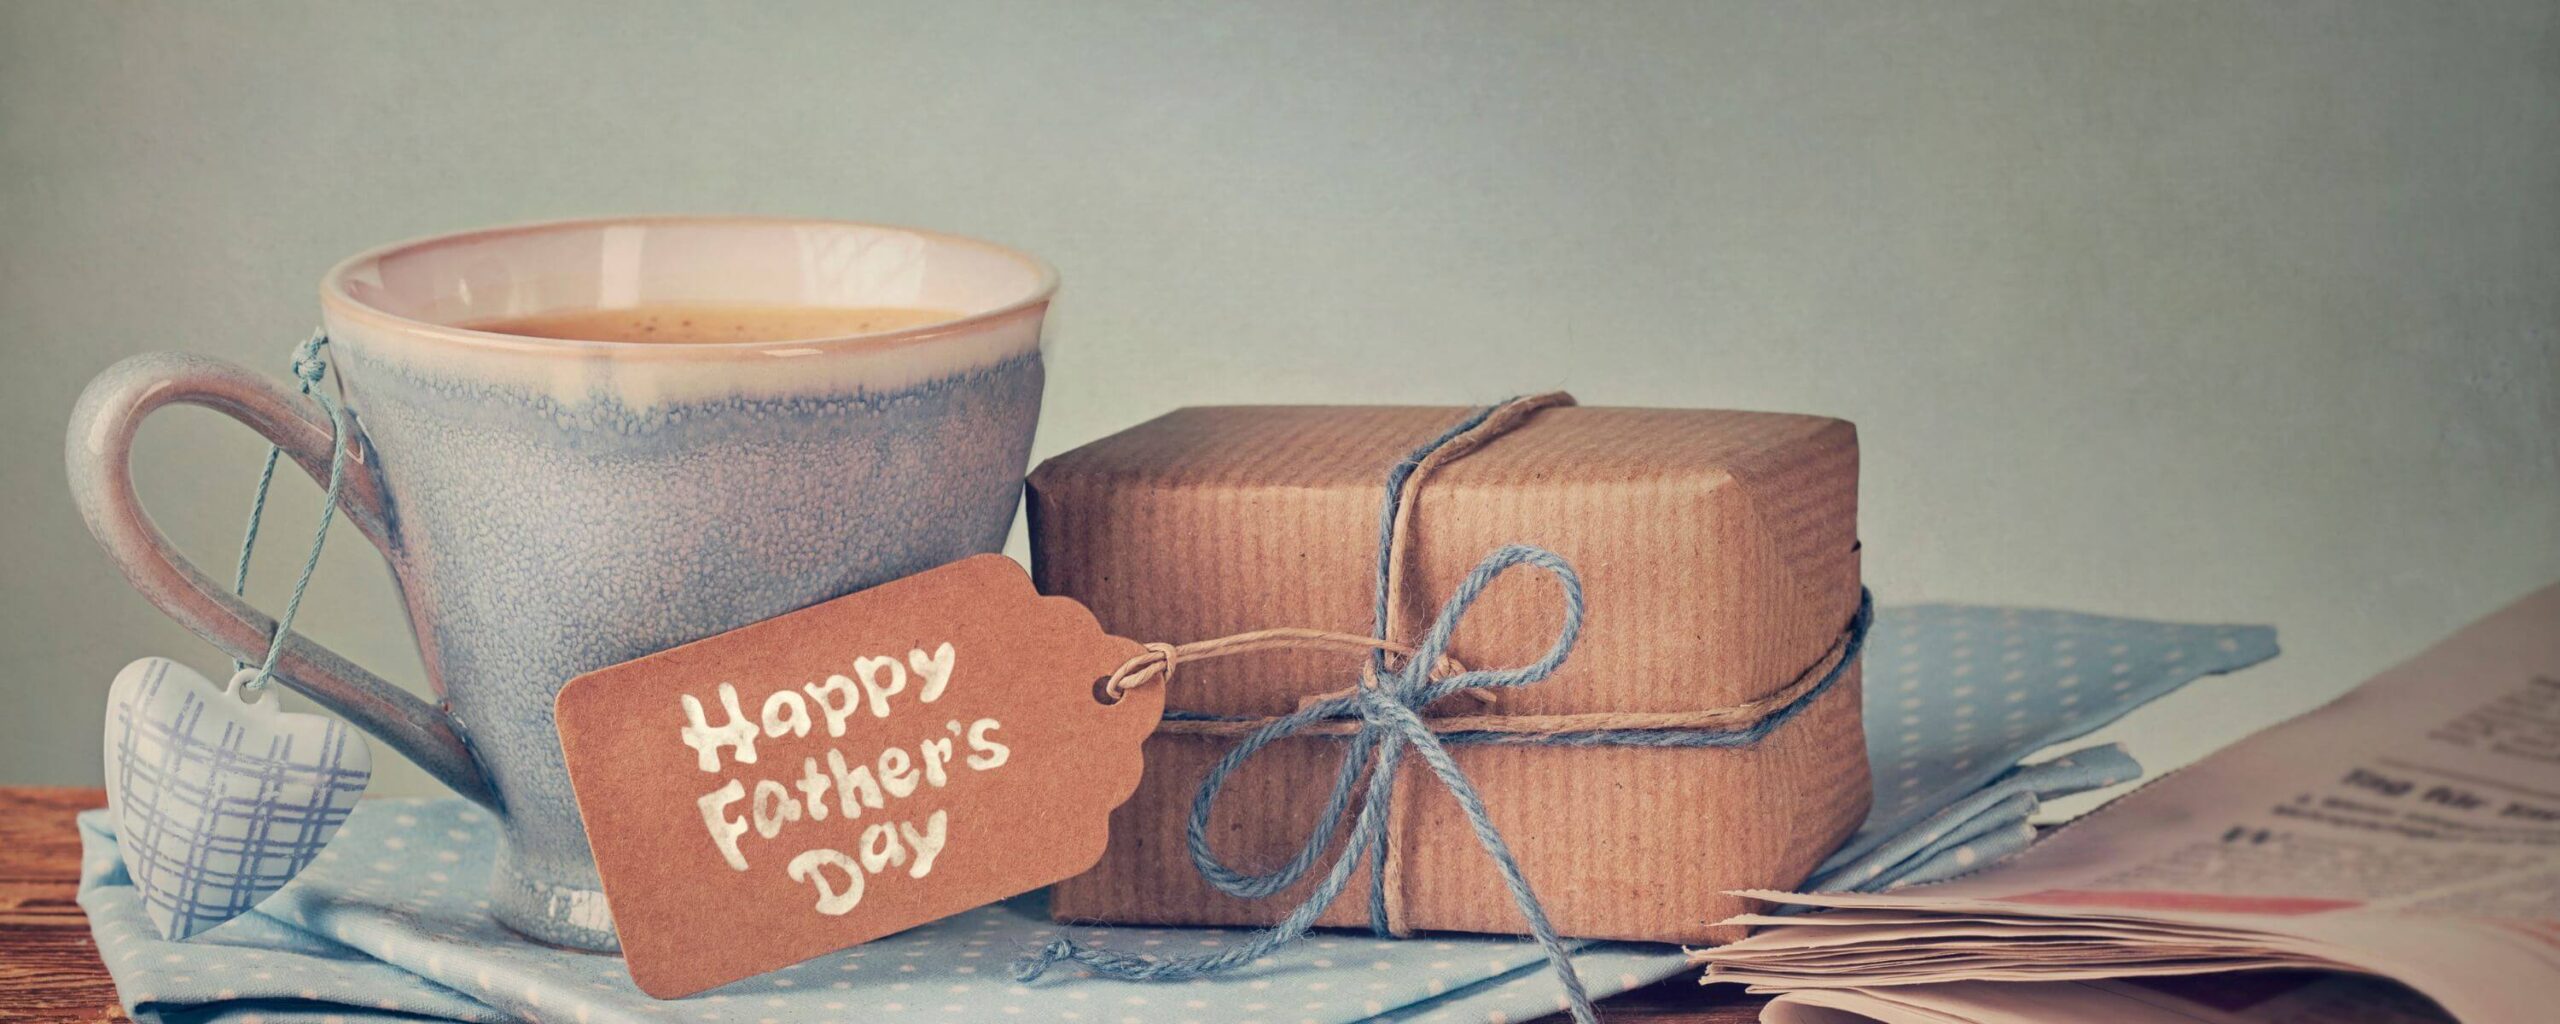 A mug and a wrapped gift with a tag that says “Happy Father’s Day"